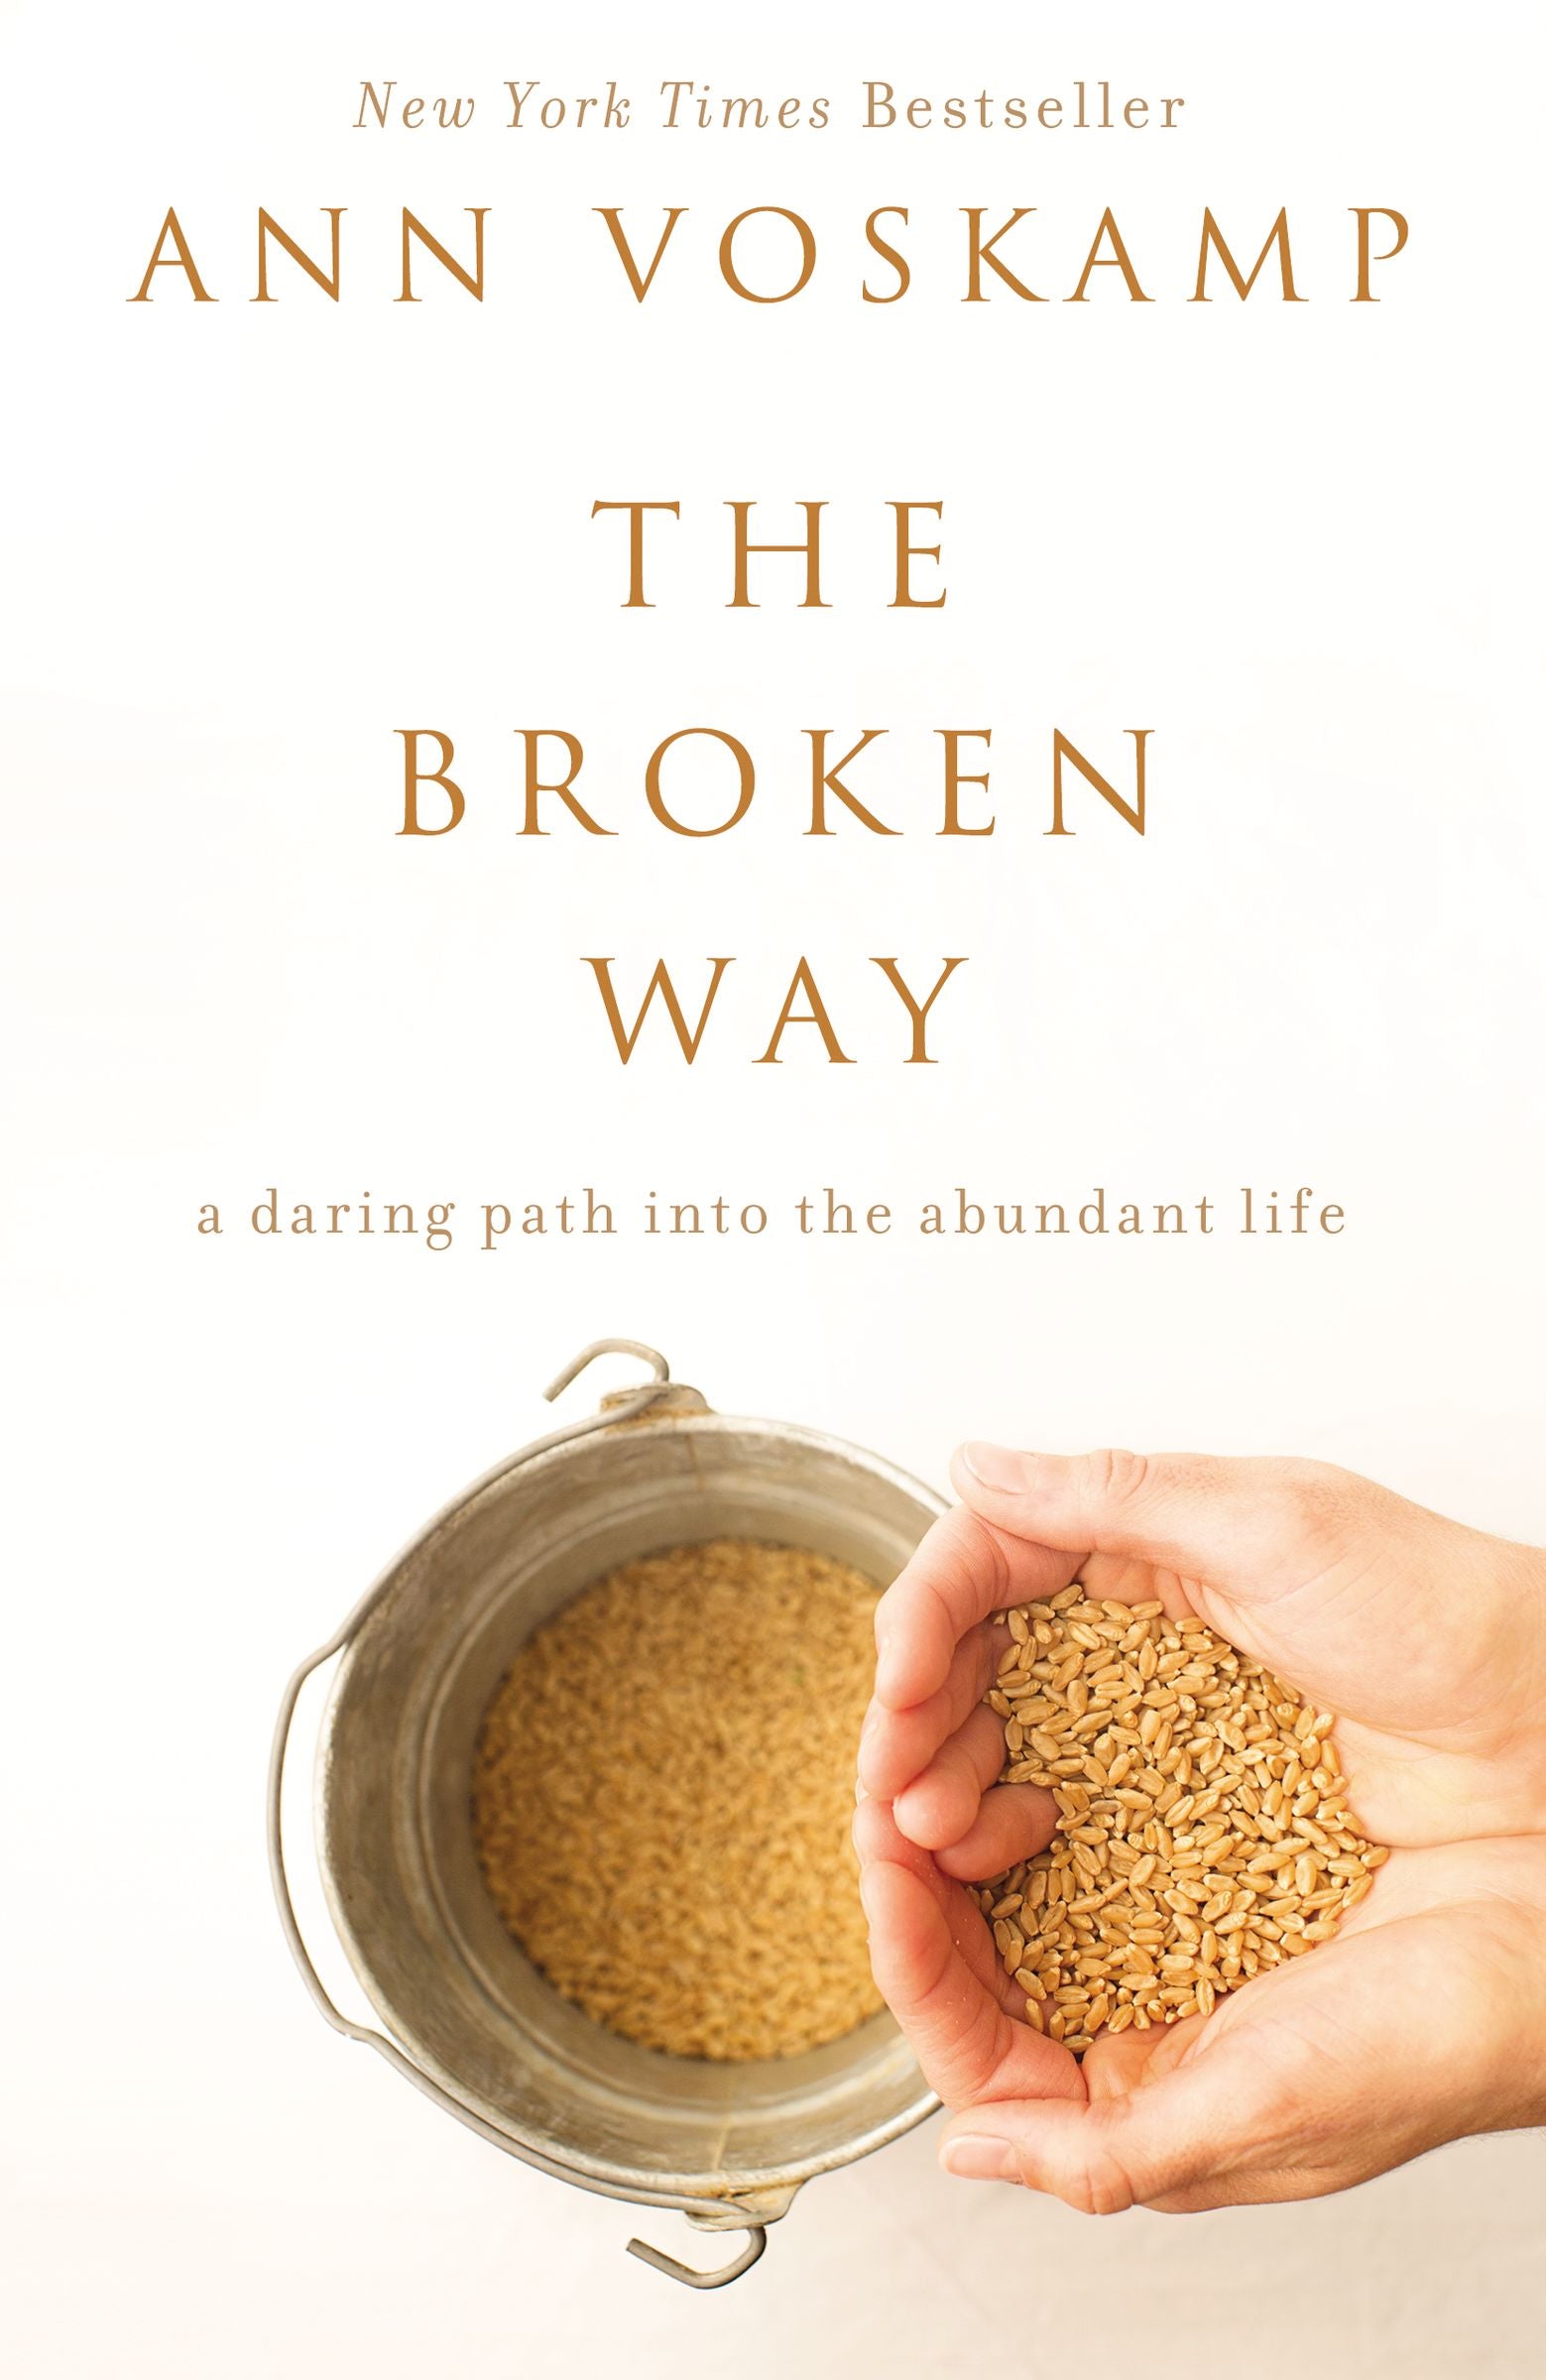 Image of The Broken Way other